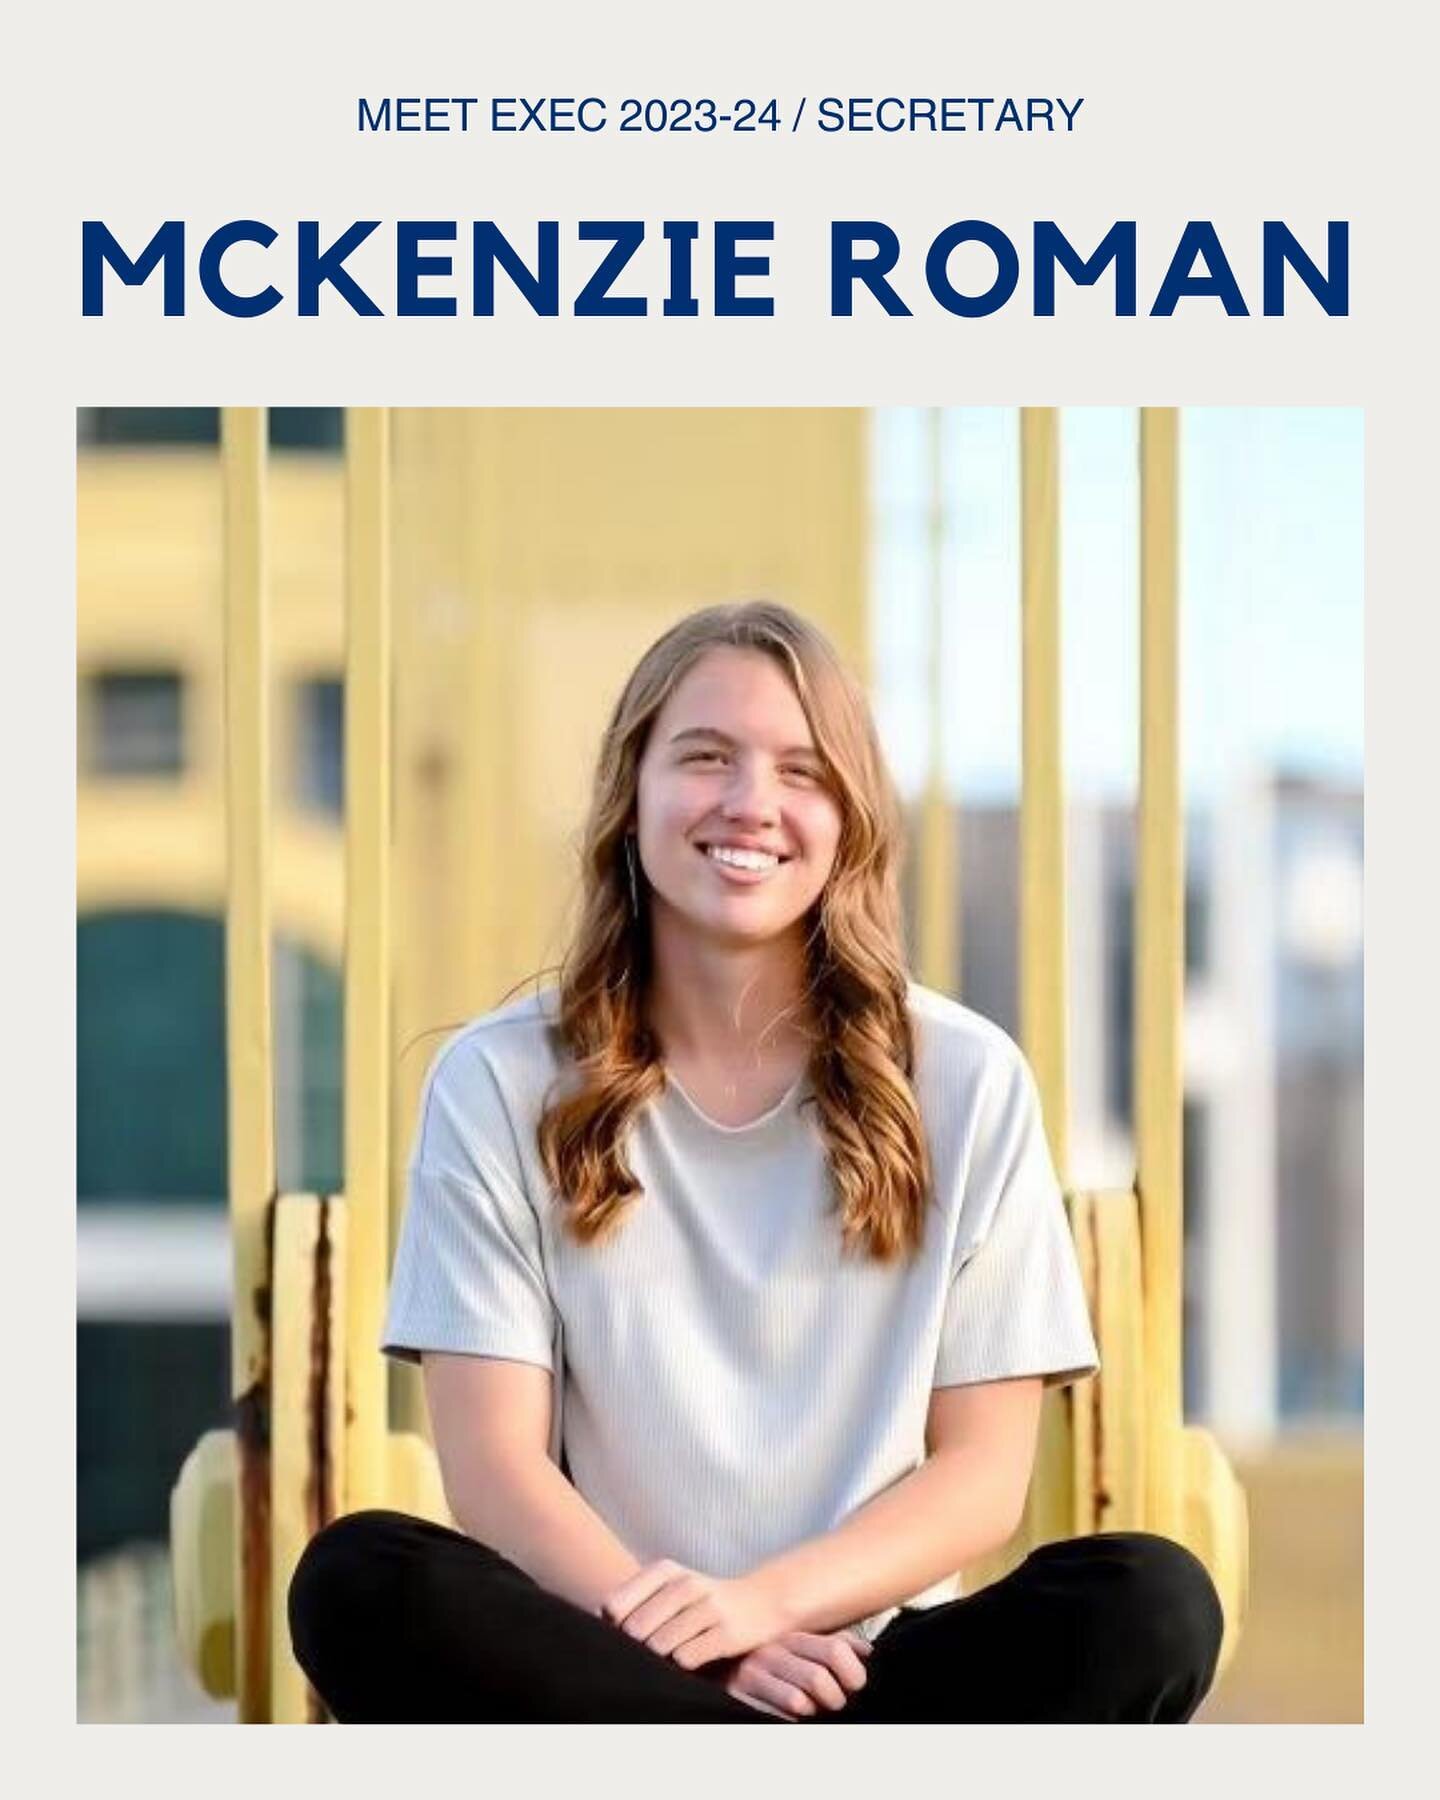 Next on this year&rsquo;s Exec, we have our secretary, McKenzie Roman! 

As a vital part of our payload subsystem, McKenzie has great rocketry aspirations, and brings that drive to her secretary position this year. 

#caserocketteam #crt #cwru #rocke